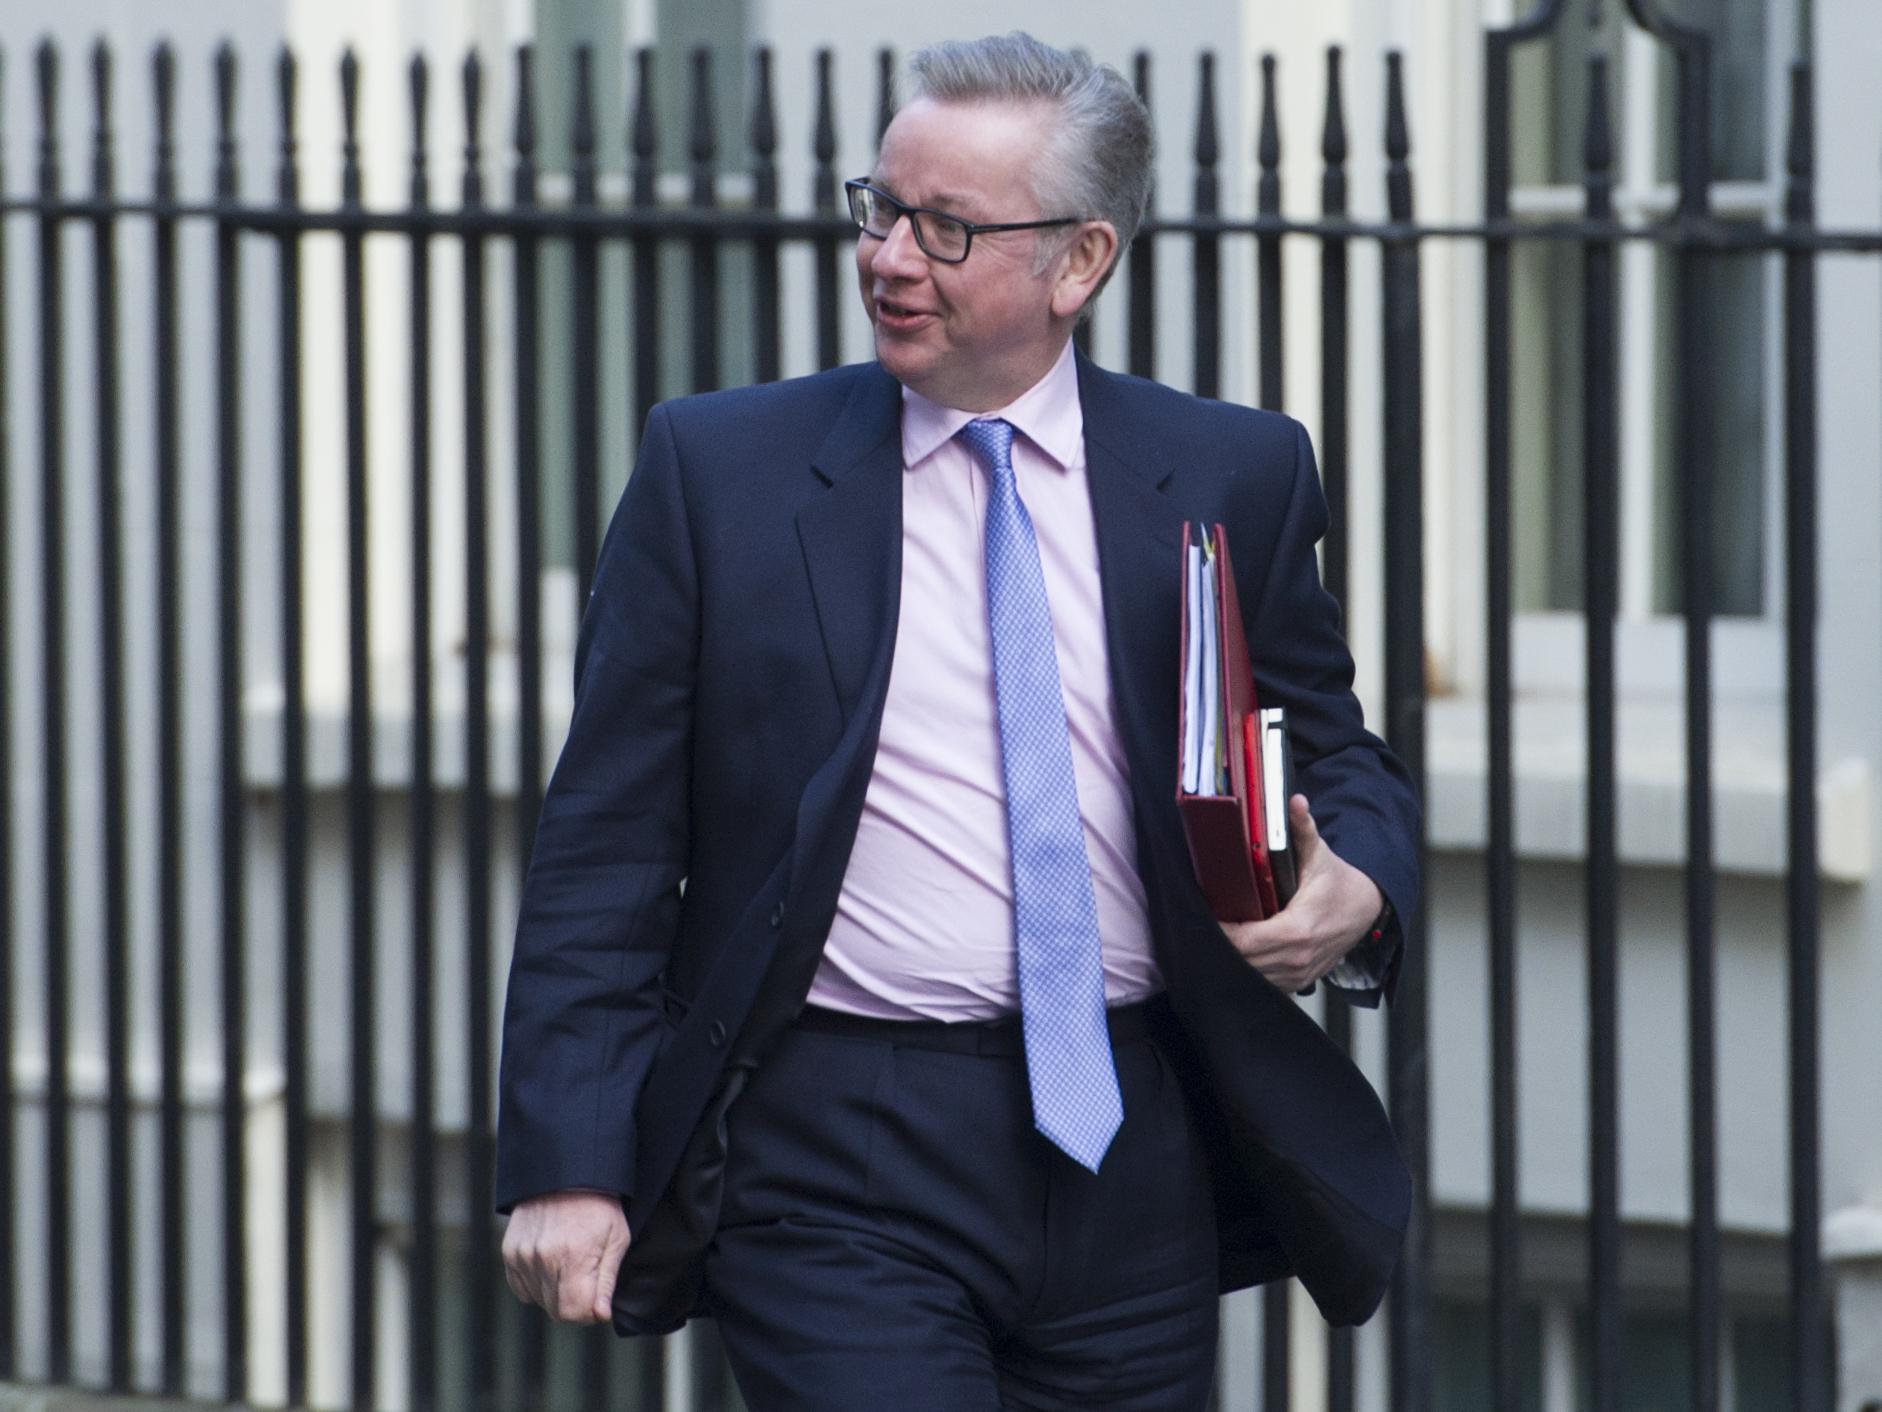 Mr Gove wanted to 'show he wasn’t prepared to accept the document as a summary of their discussions'